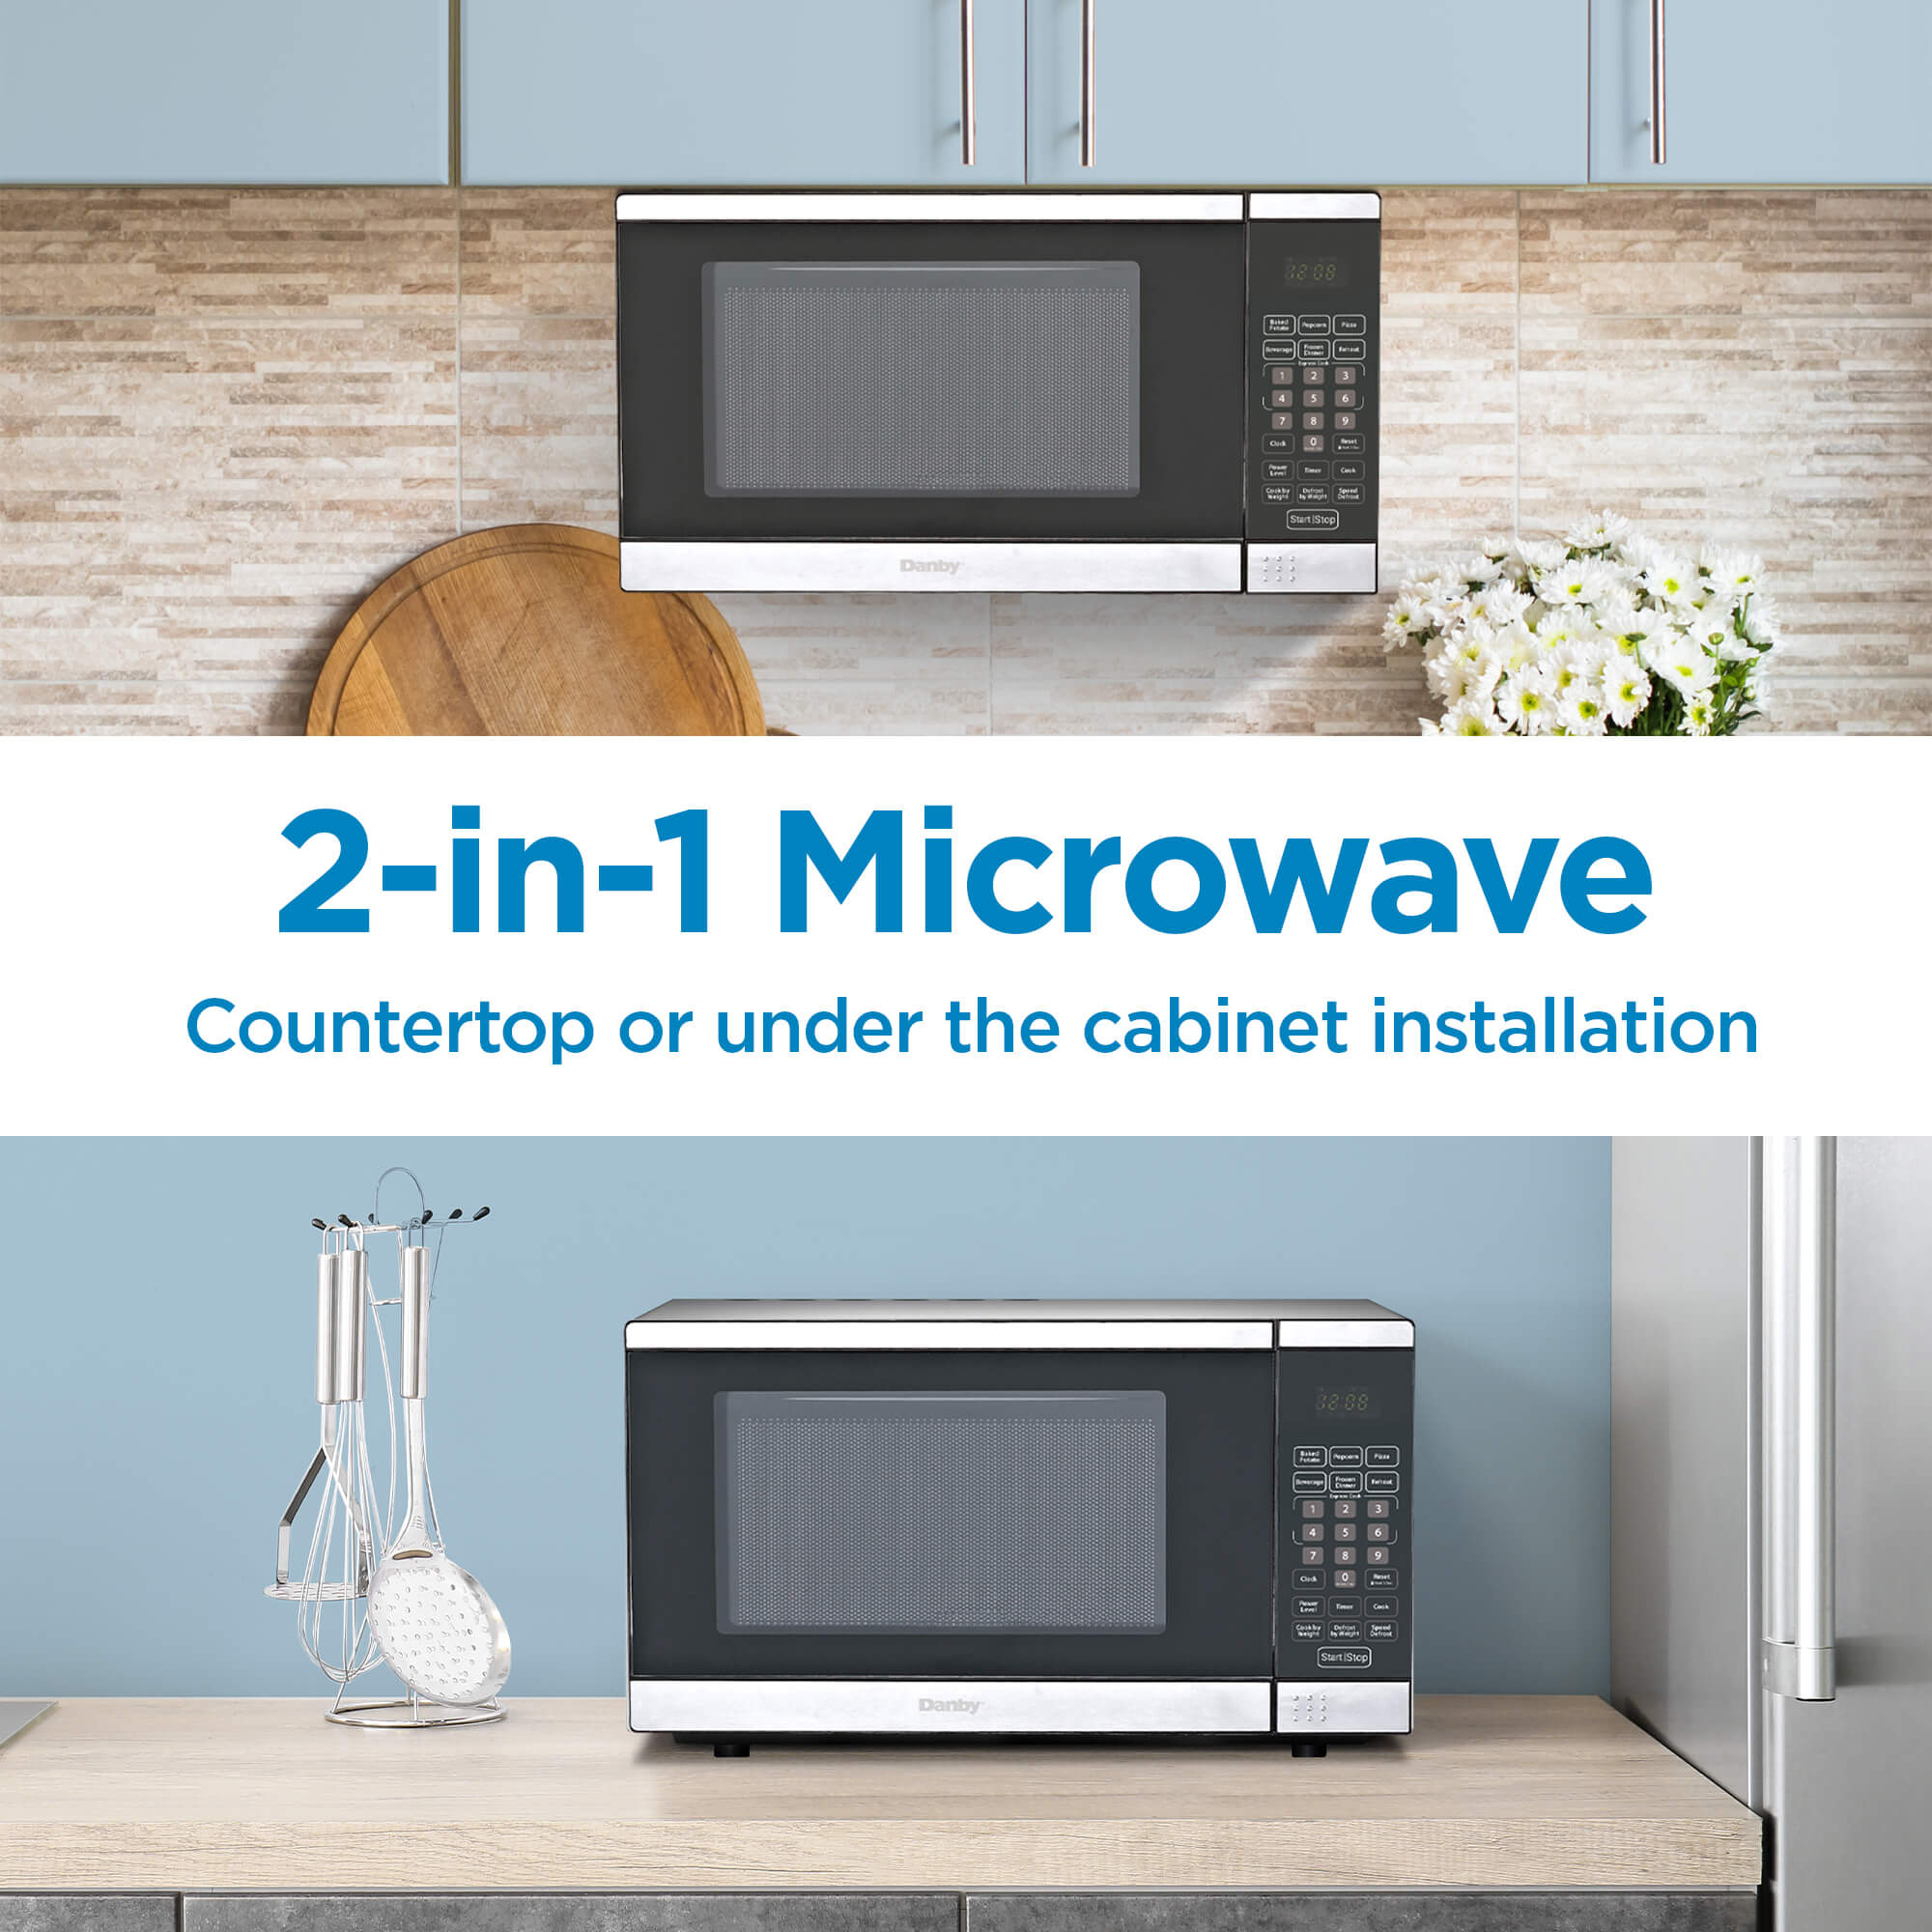 Danby - 0.7 cu. Ft  Counter top Microwave in Stainless - DDMW007501G1